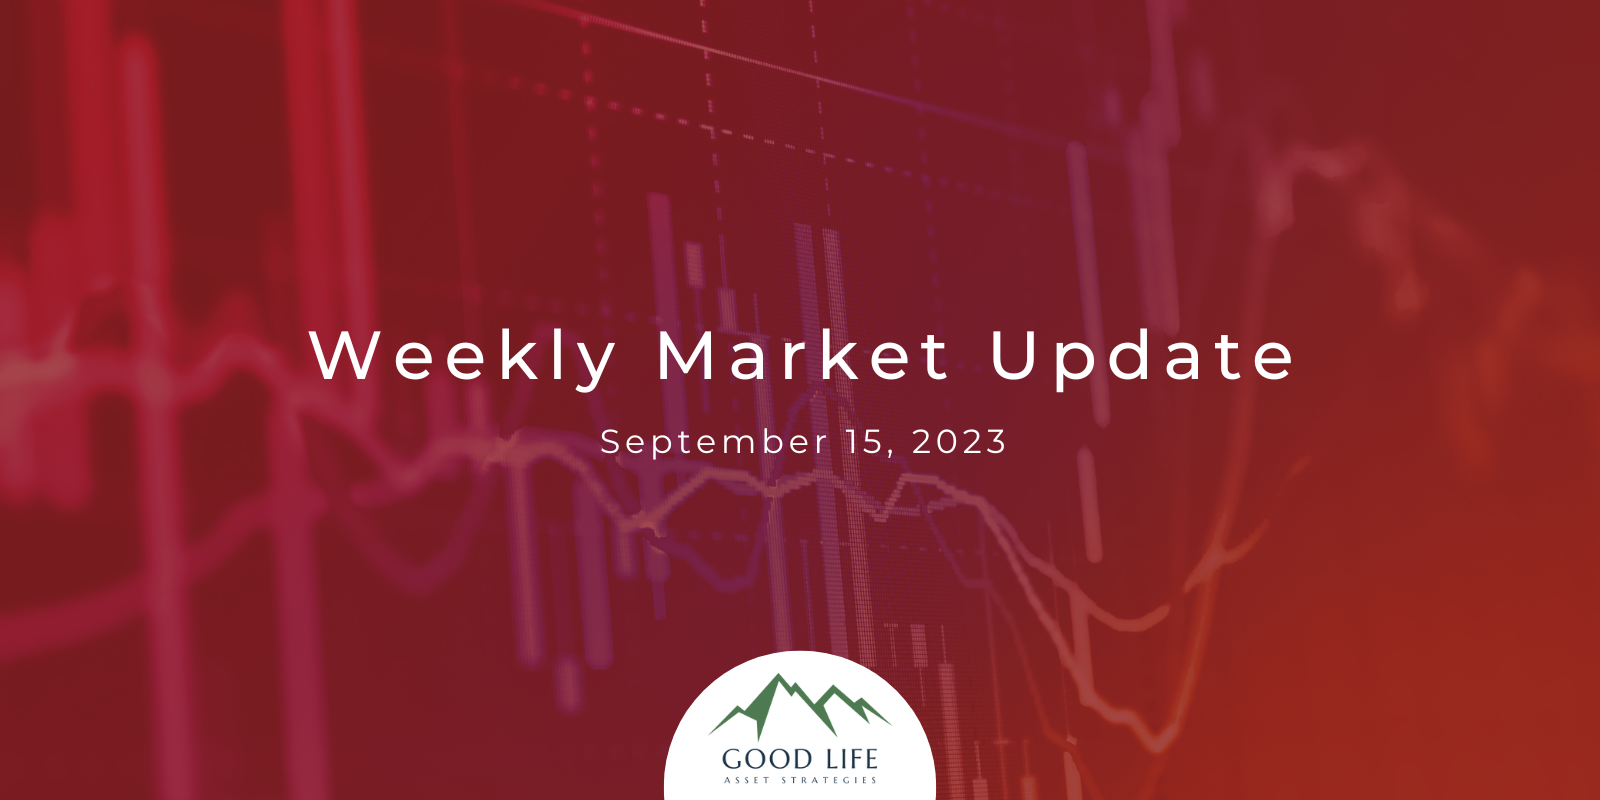 Stock Breakout Coming Soon: Weekly Market Update for September 15, 2023, from DeWayne Hall